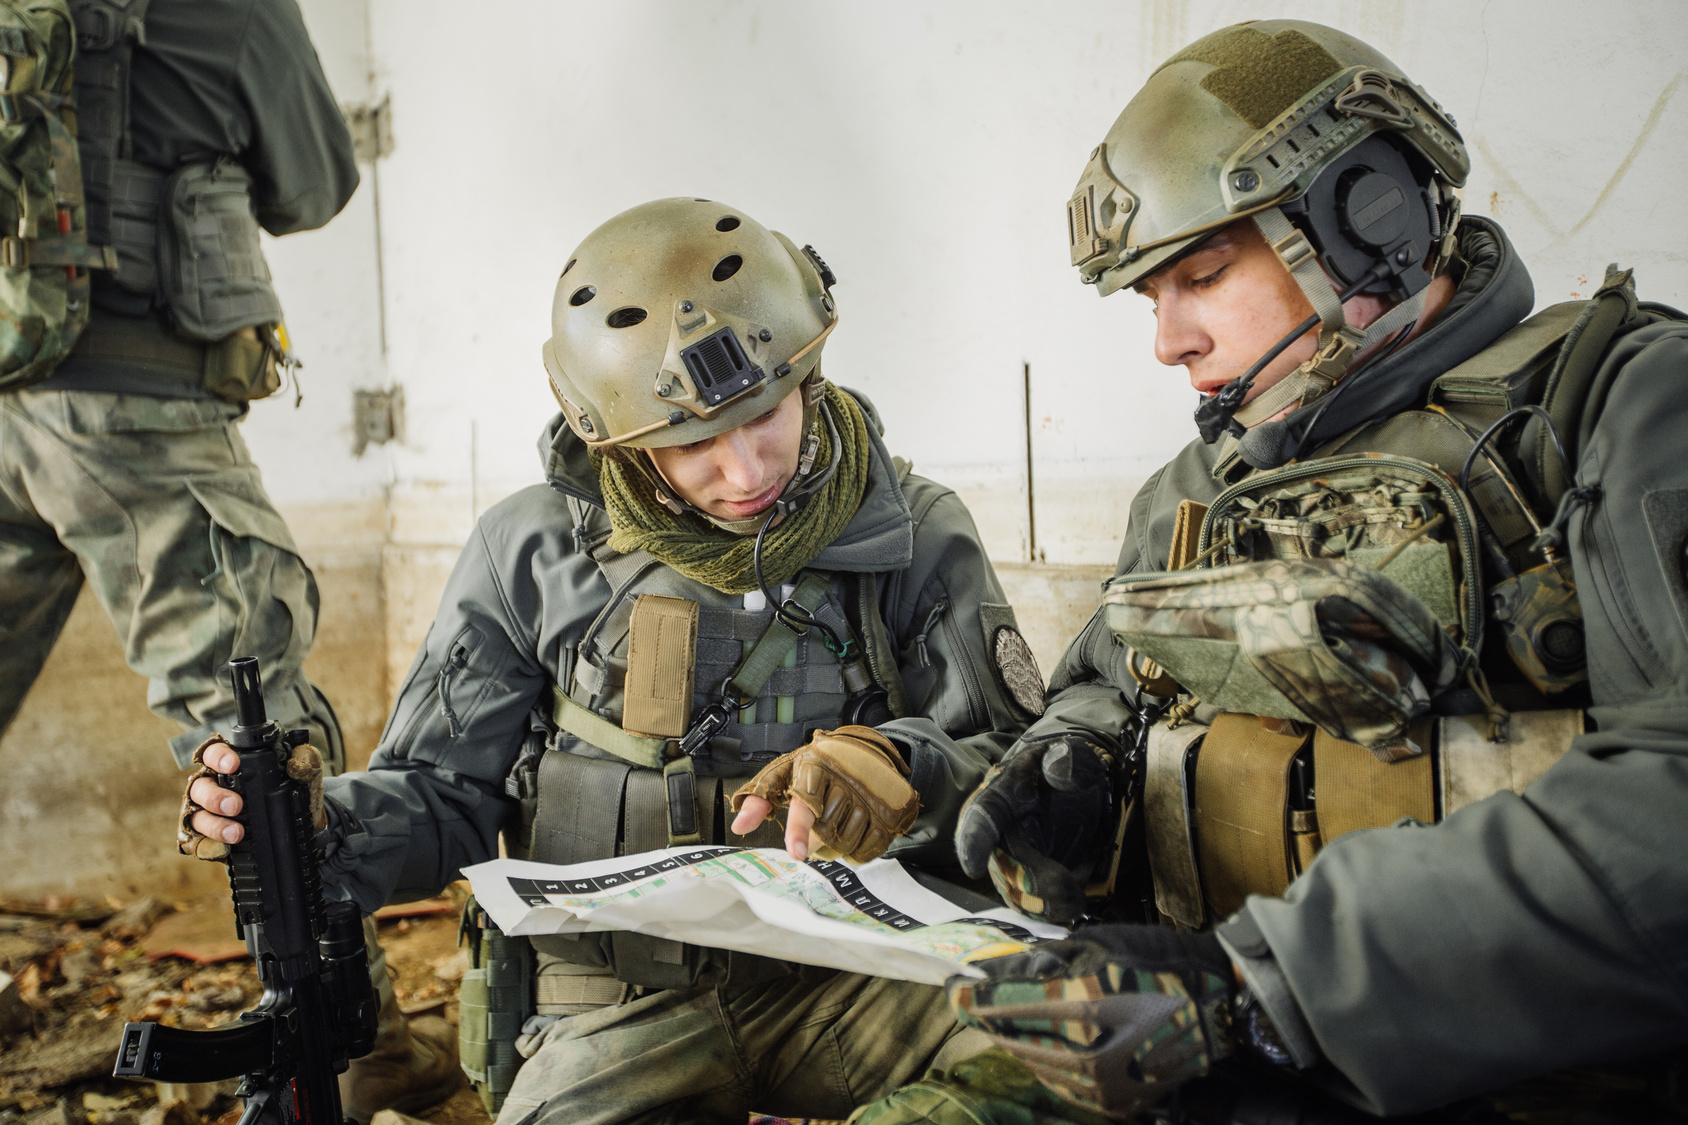 in the photo, a military operating group during exercise